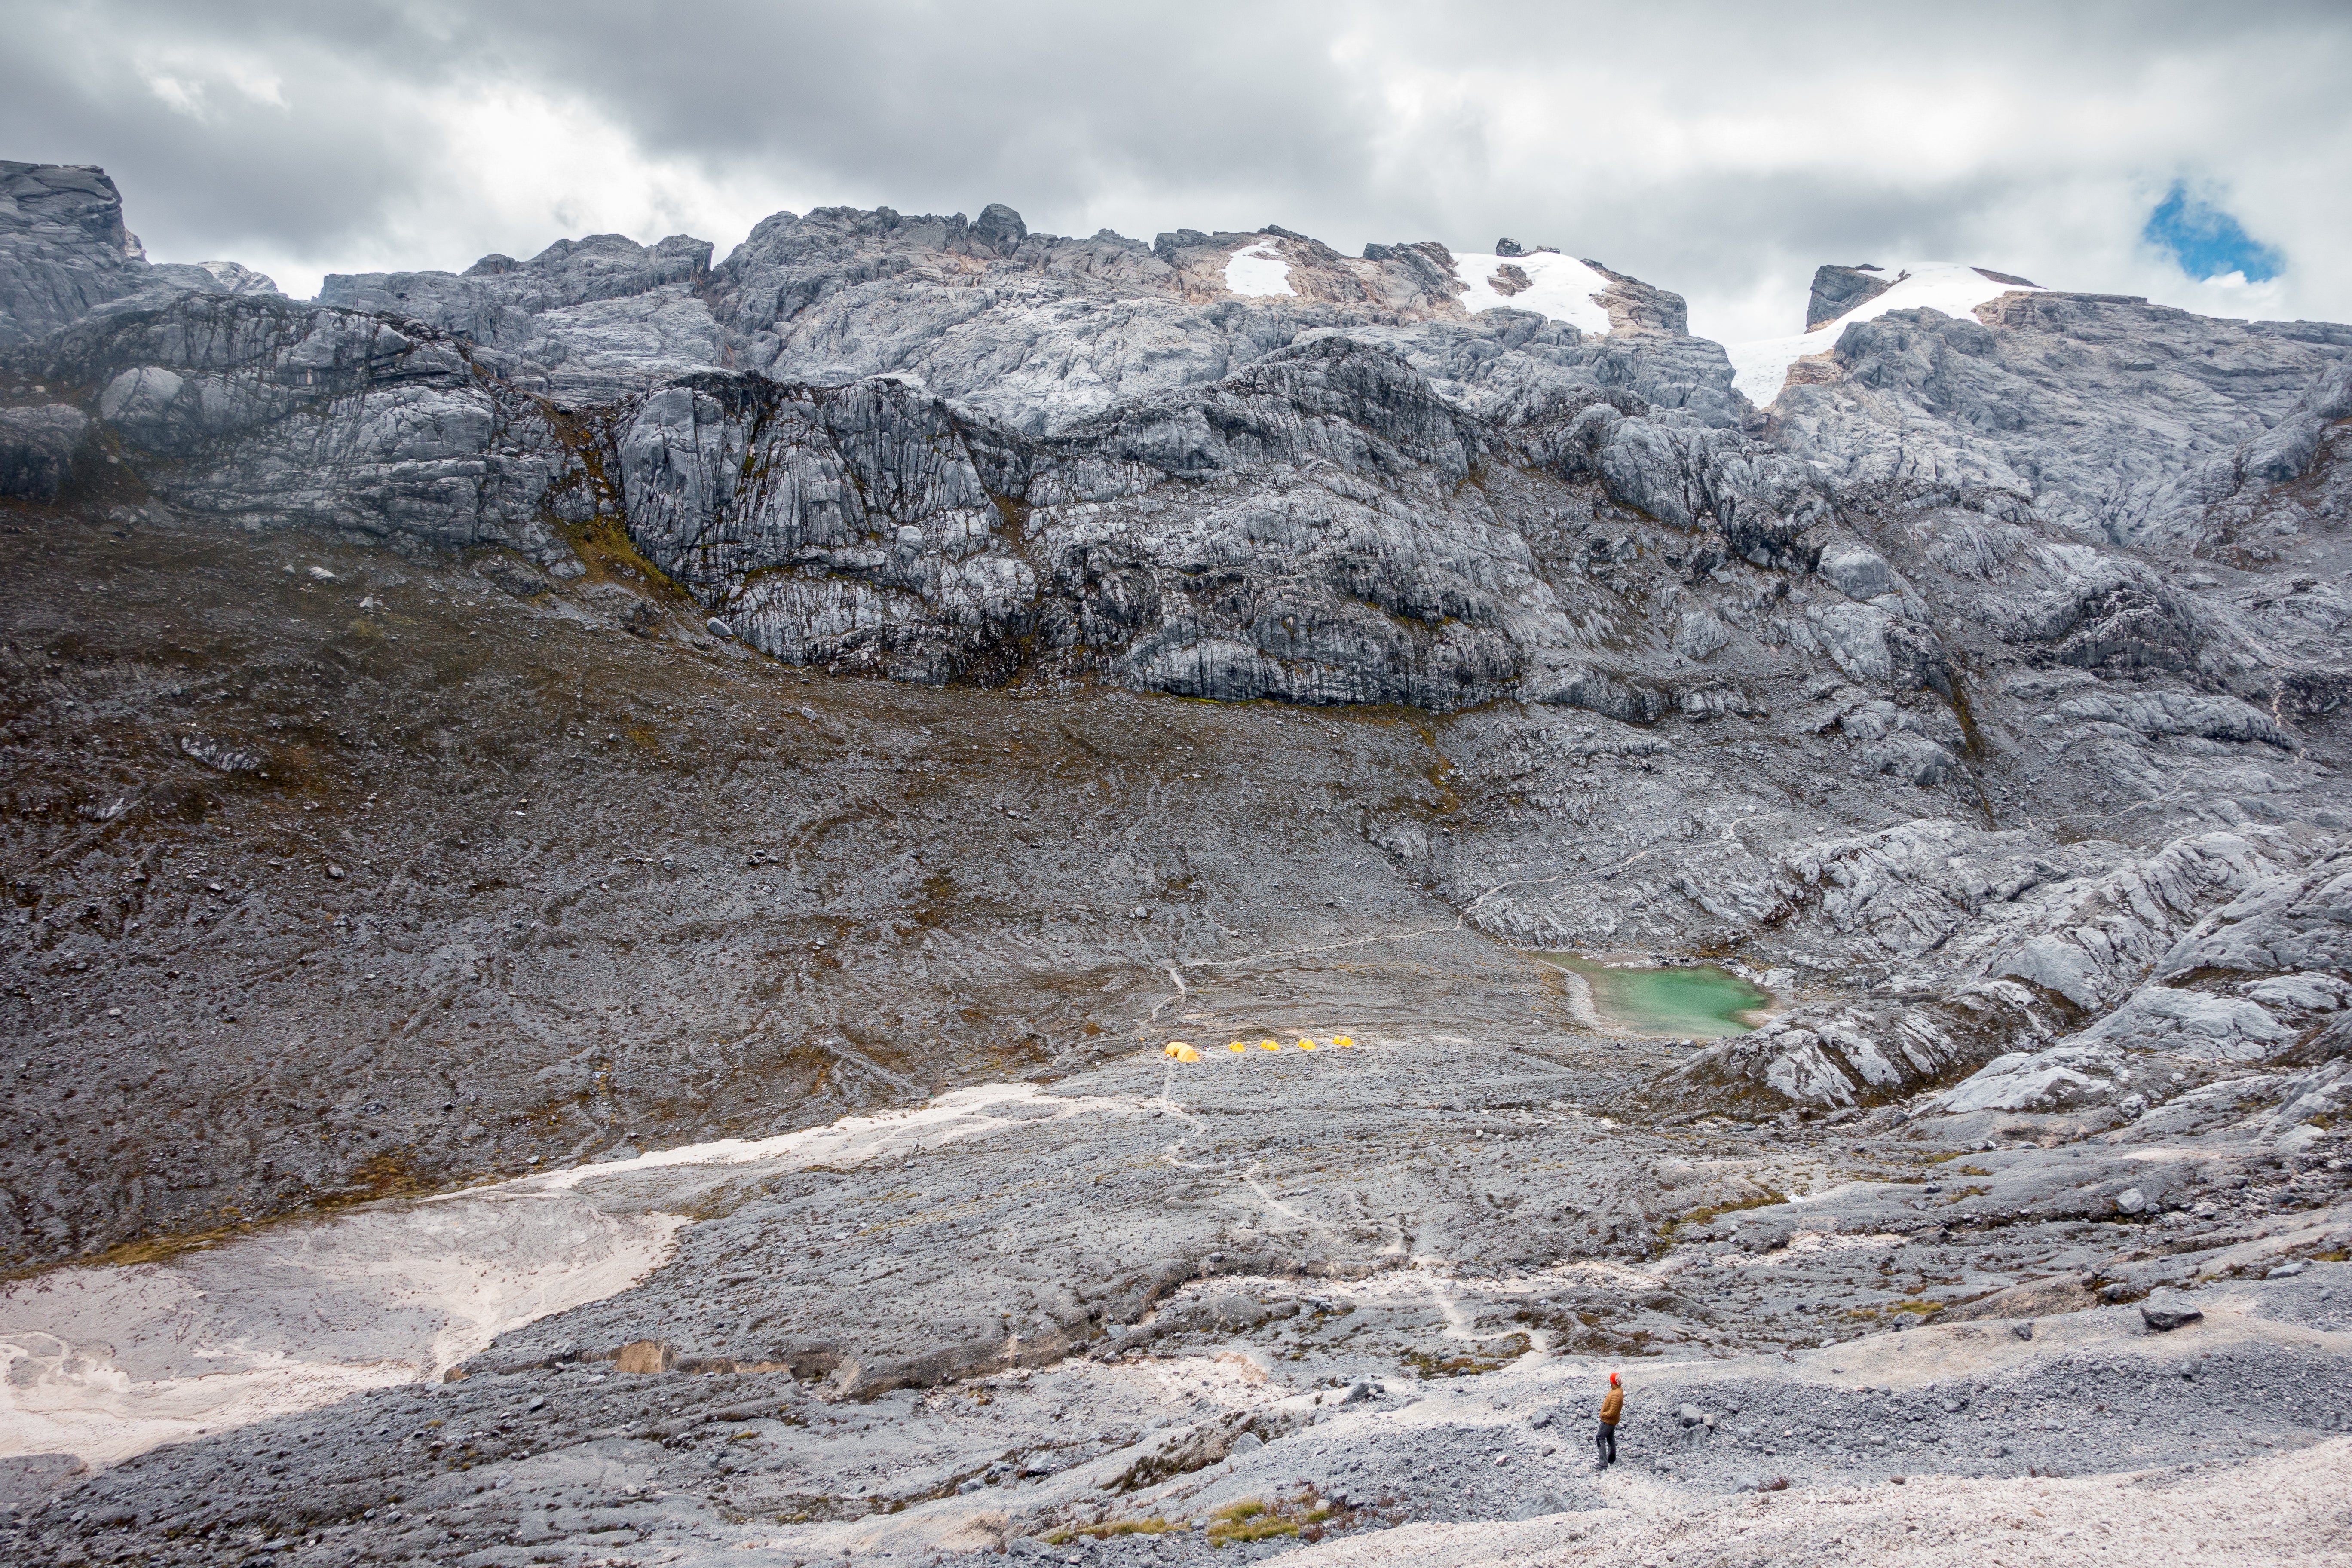 Puncak Jaya is the highest mountain in Indonesia – and its glacier is receding fast